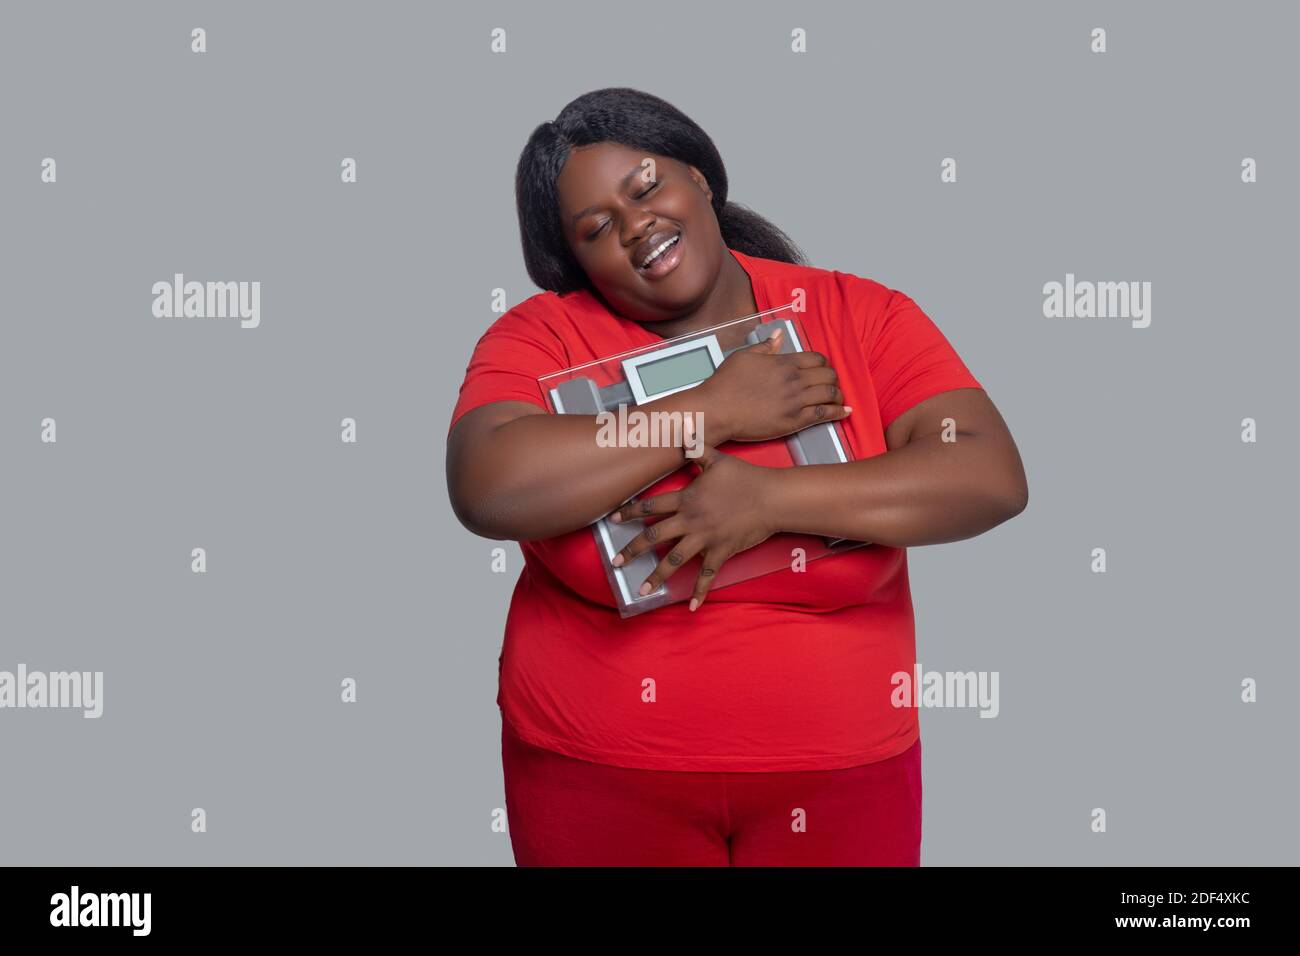 Young dark-skinned woman in red clothes holding weighing machine Stock Photo